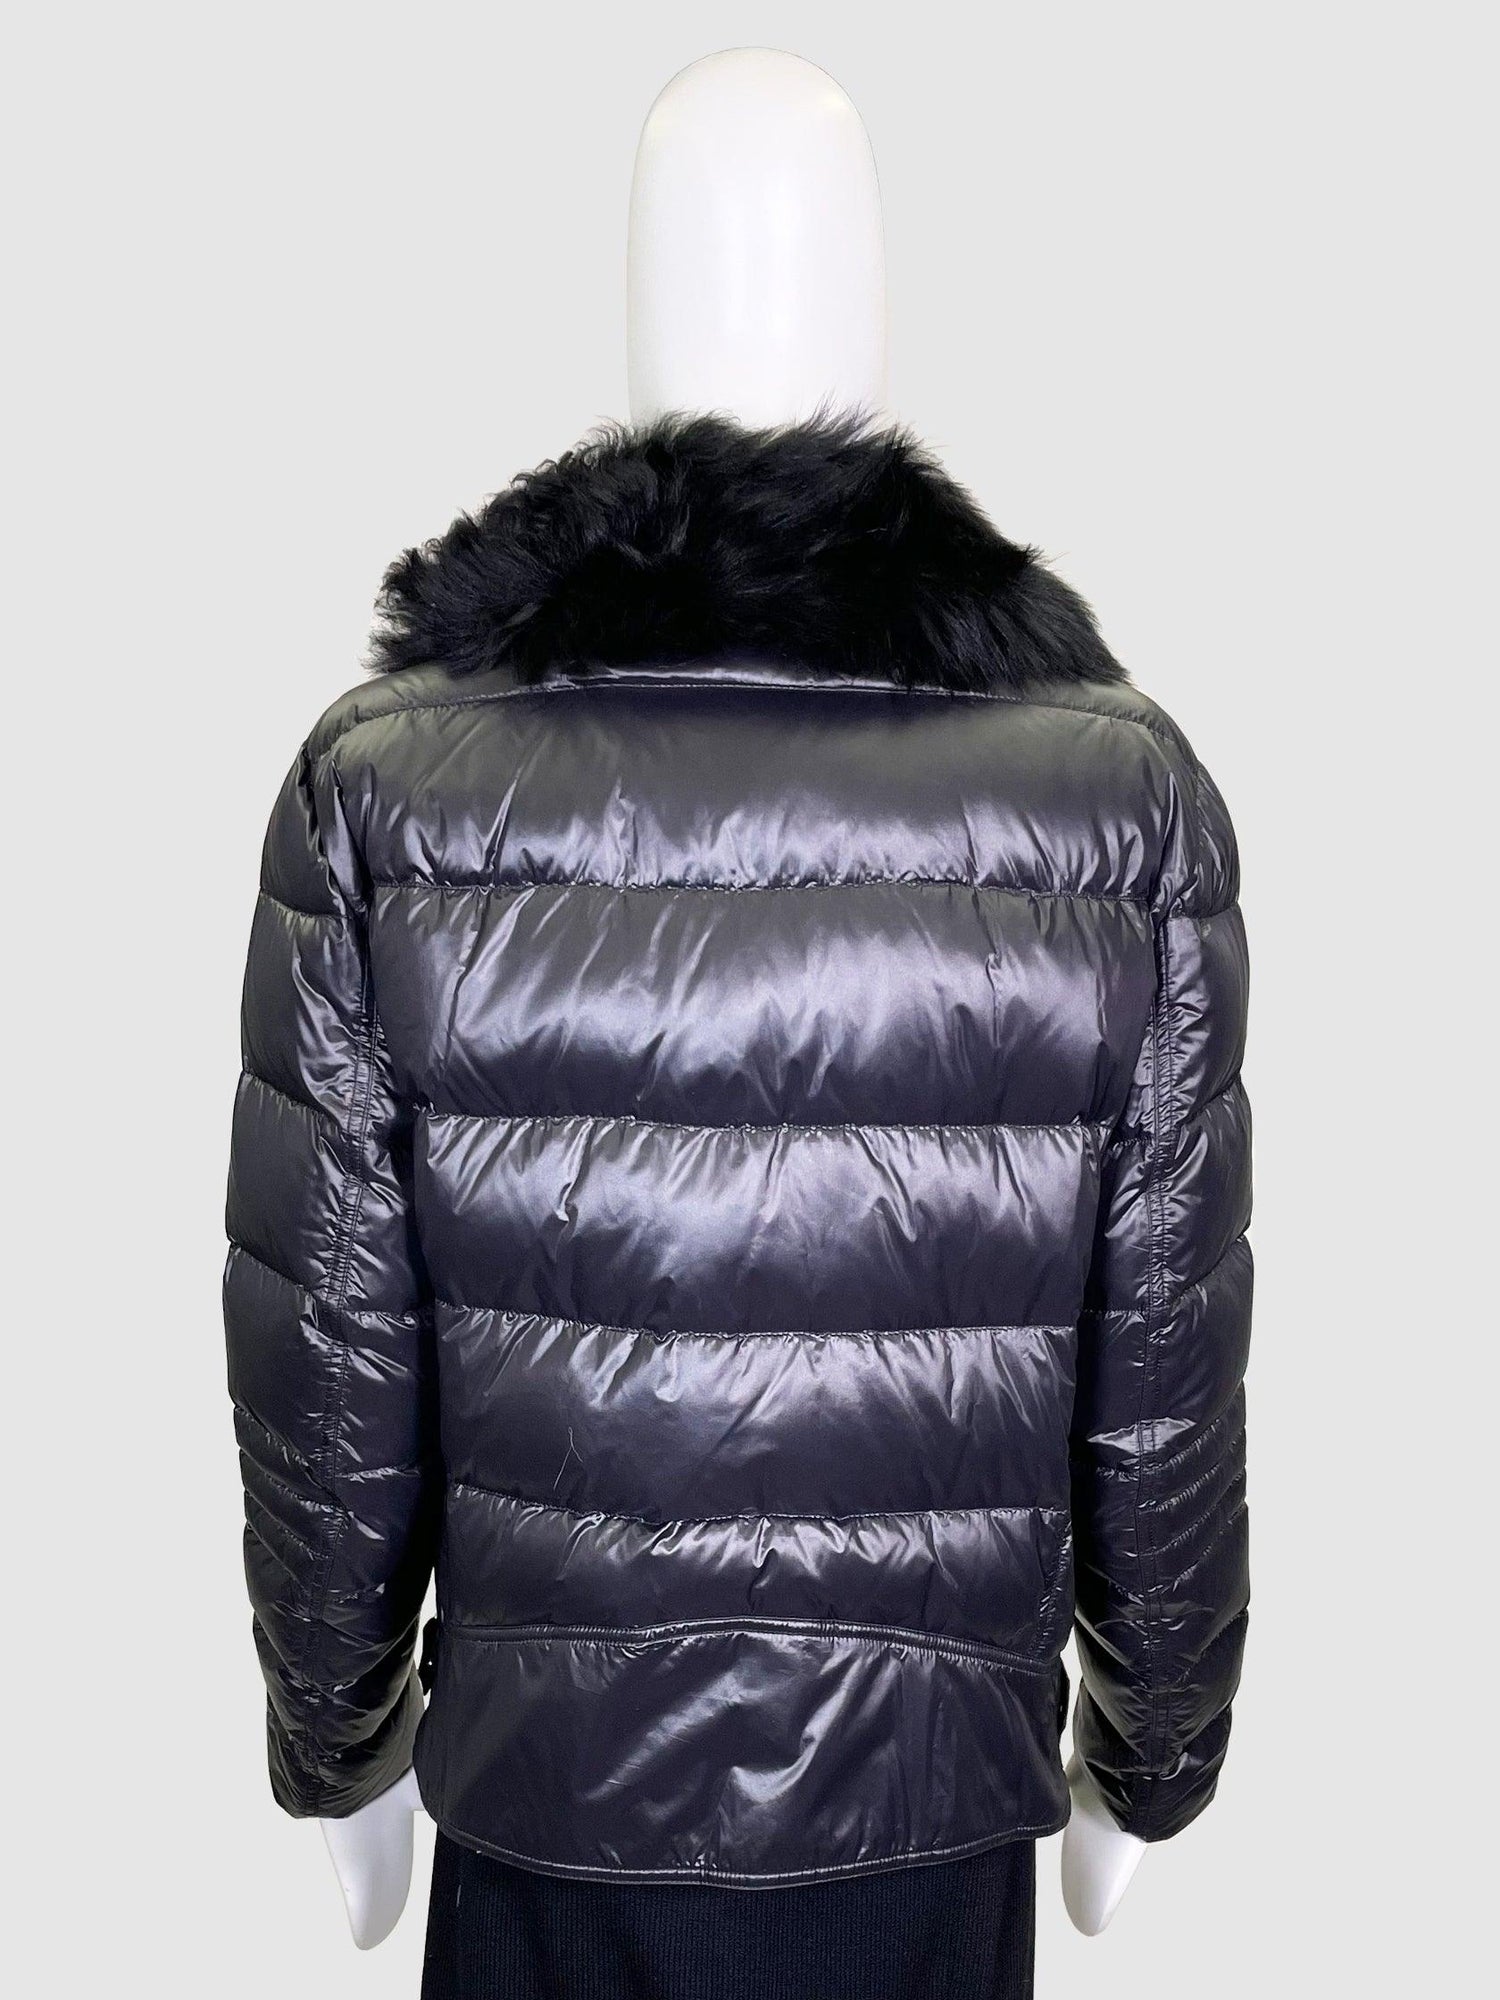 Roberto Cavalli Puffer Jacket - Size 48 - Second Nature Boutique